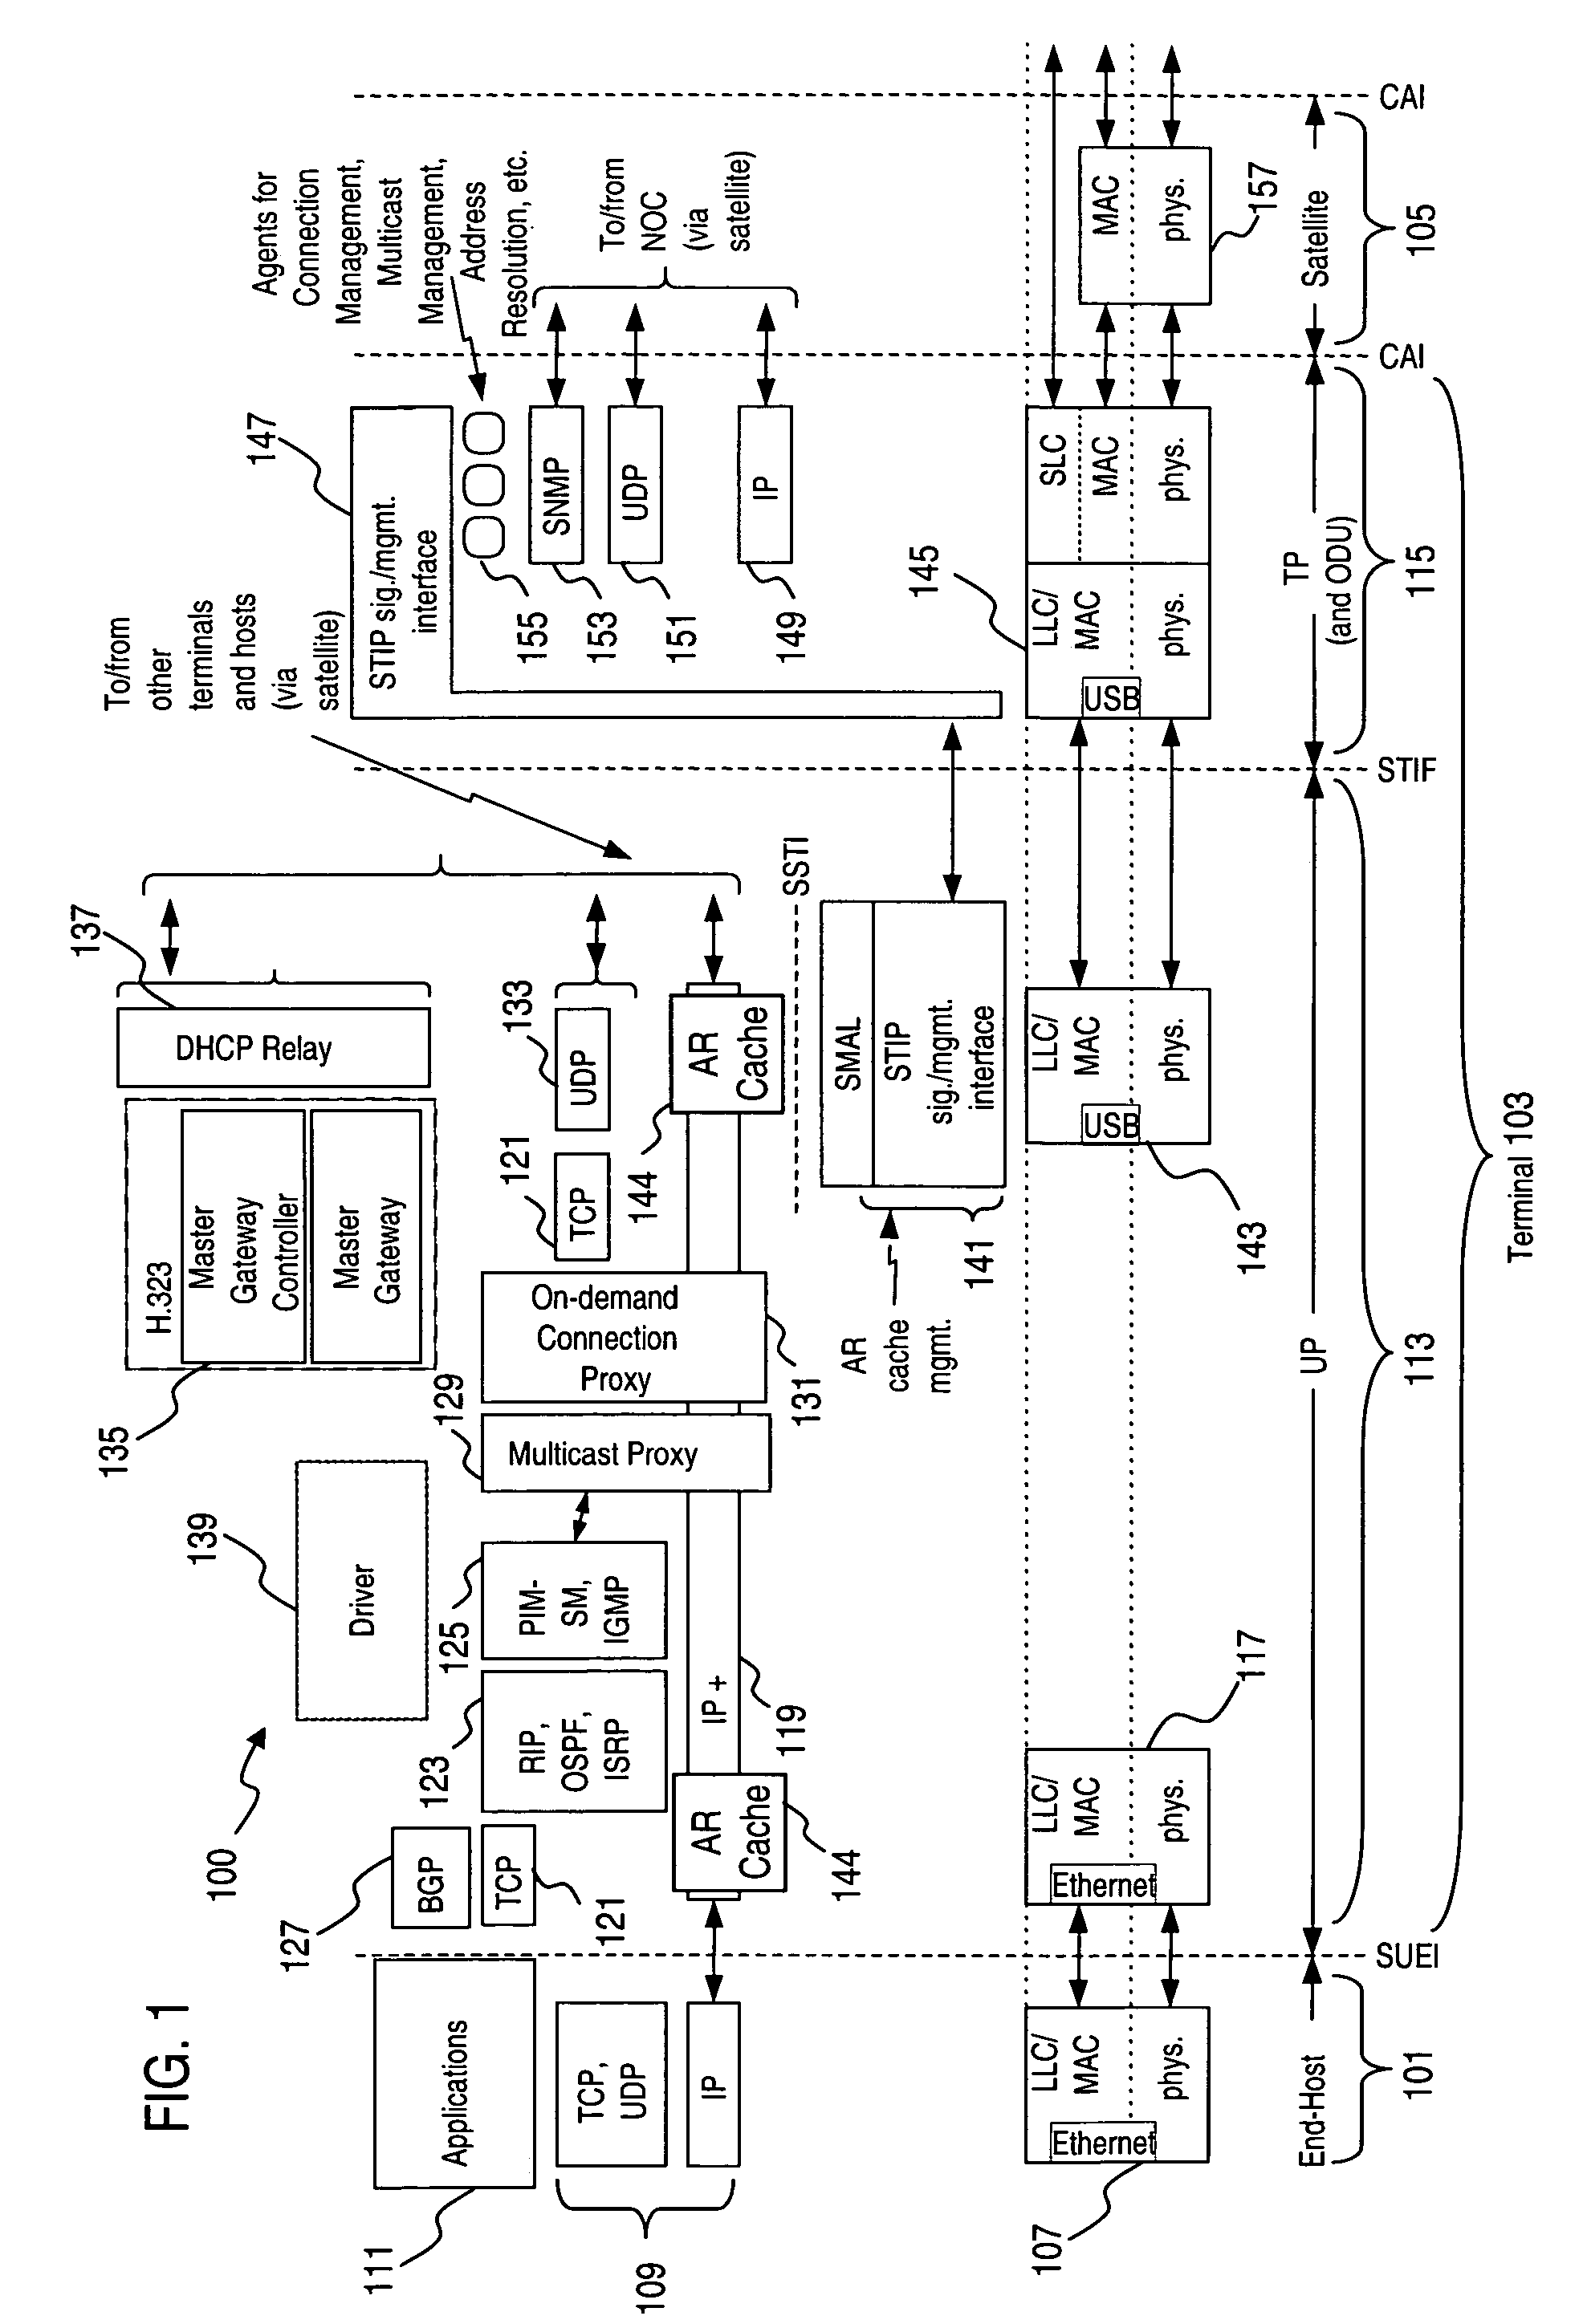 System and method for routing among private addressing domains